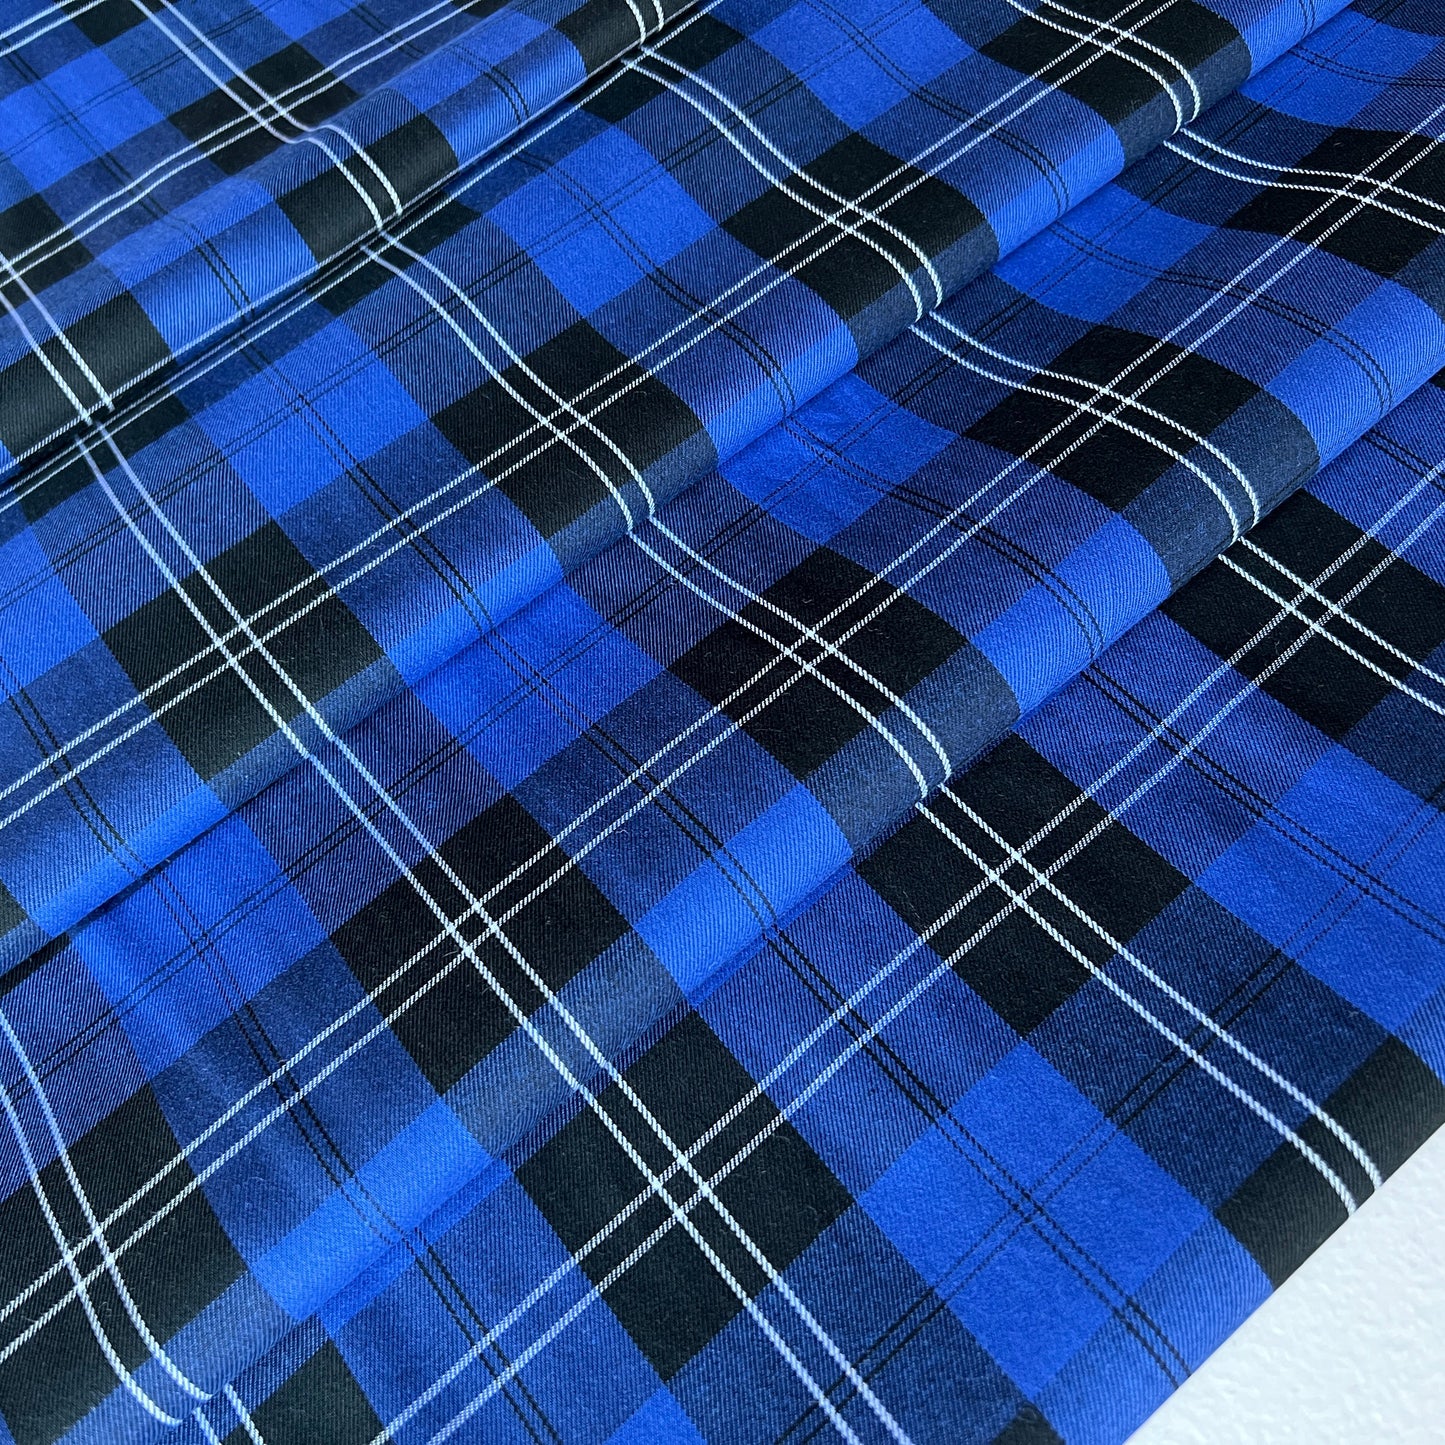 Remnant: House of Wales Plaid in Cobalt - 1 1/4 yards